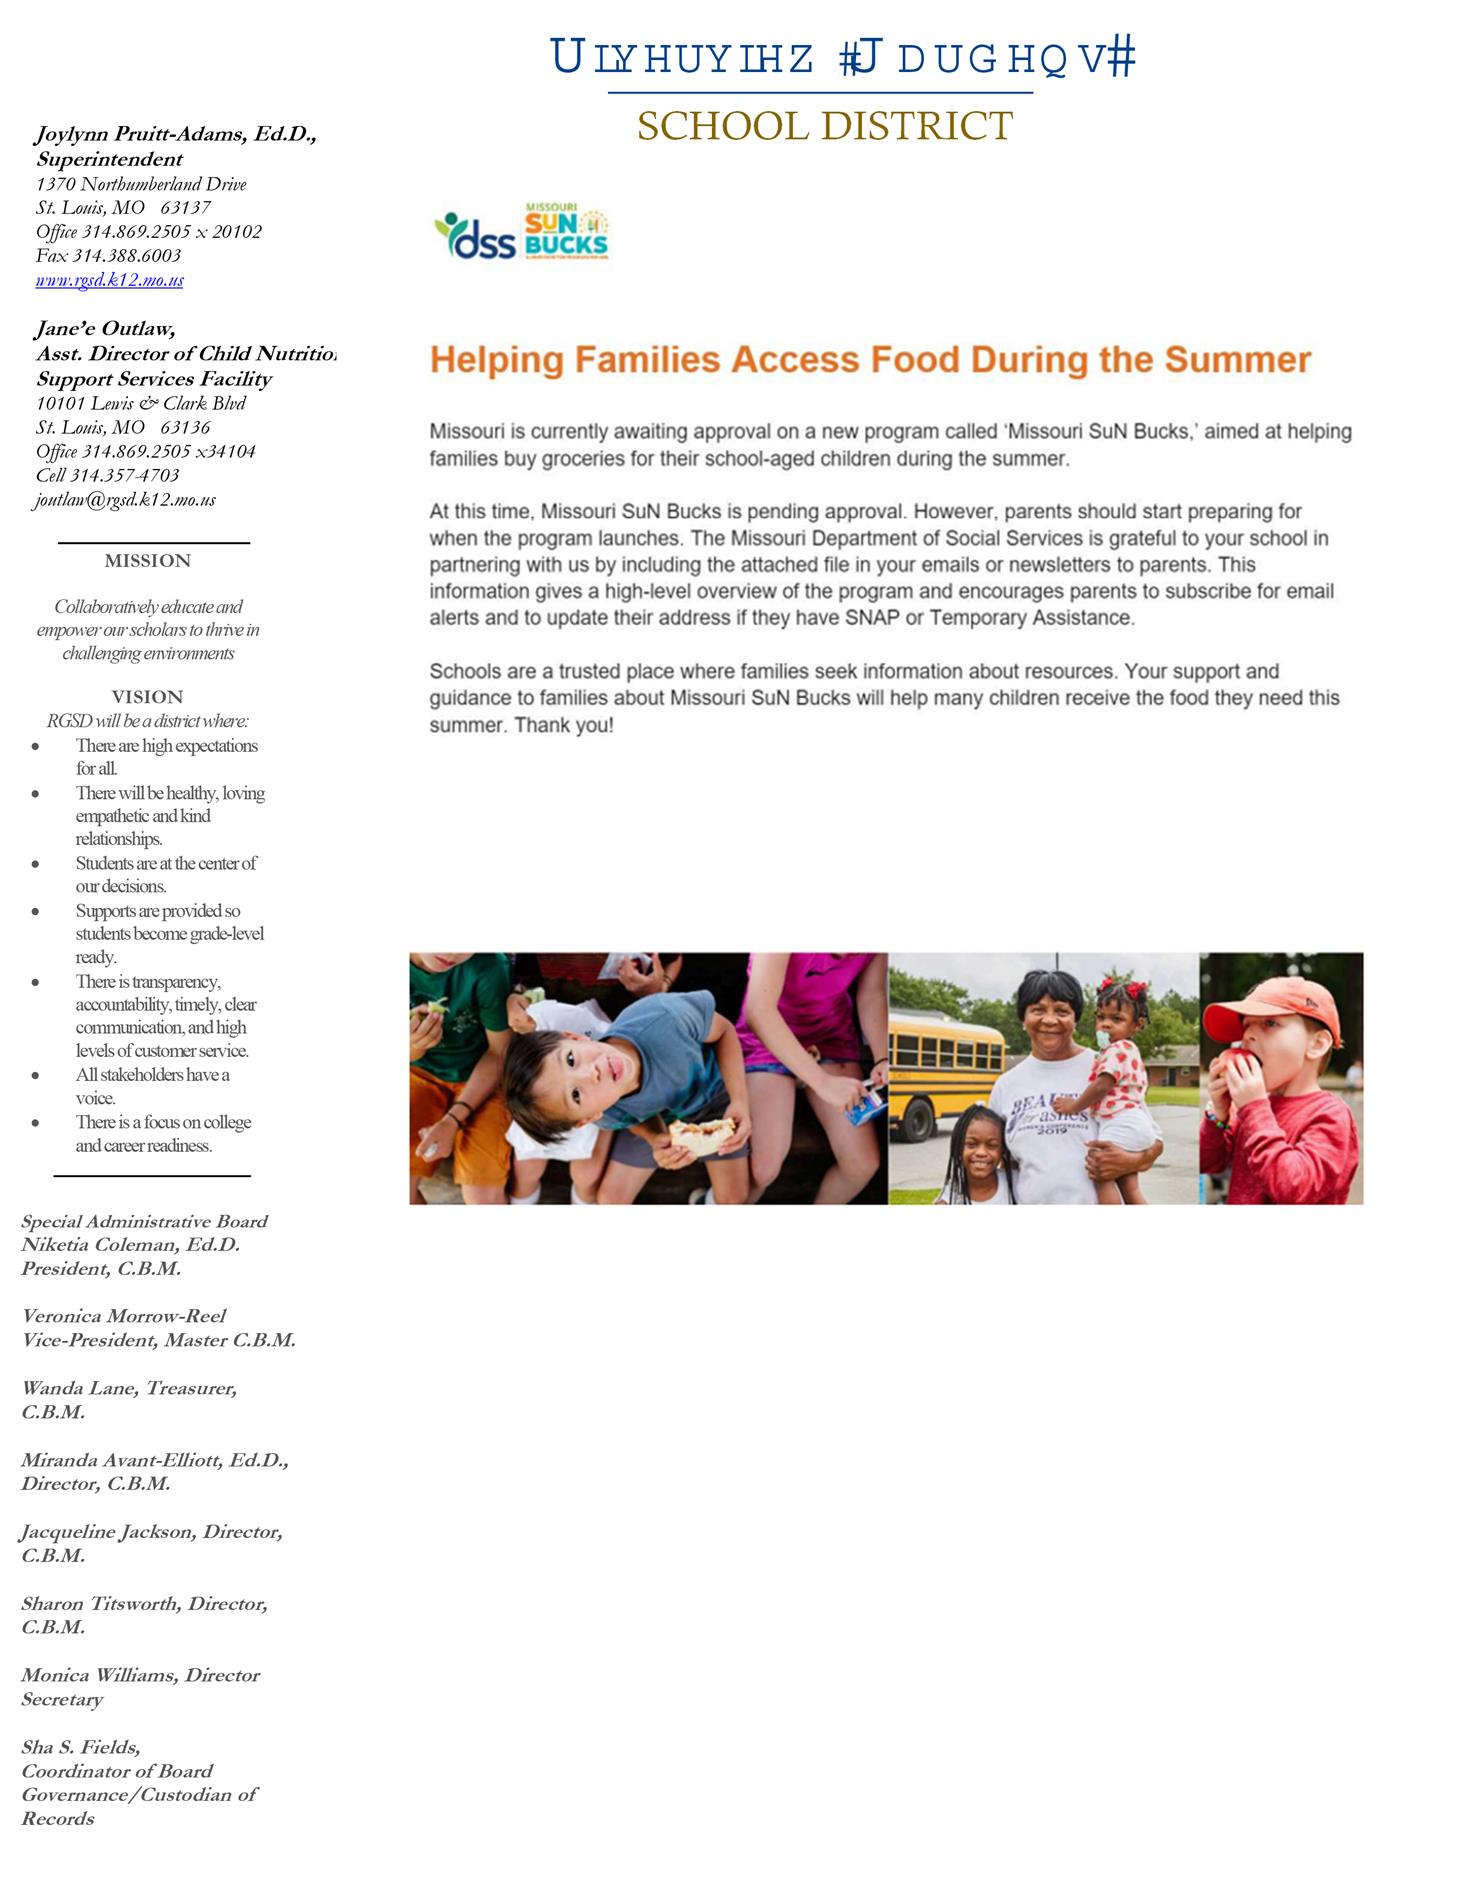 Helping Families Access Food During the Summer